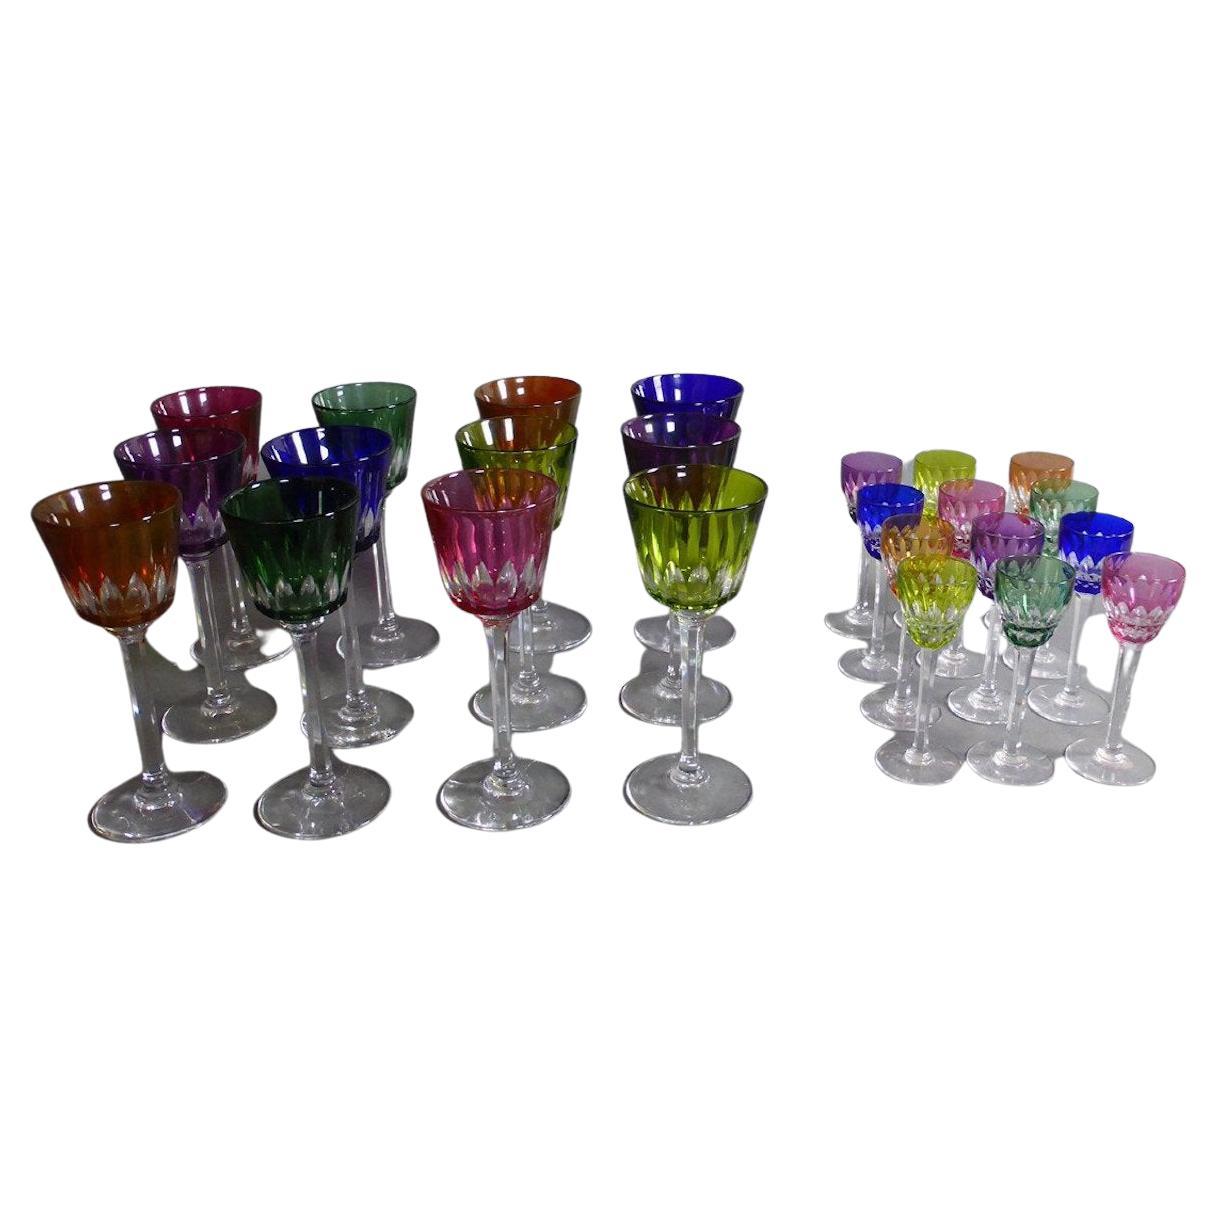 Set of 24 Colored Crystal Glasses by Bacarrat